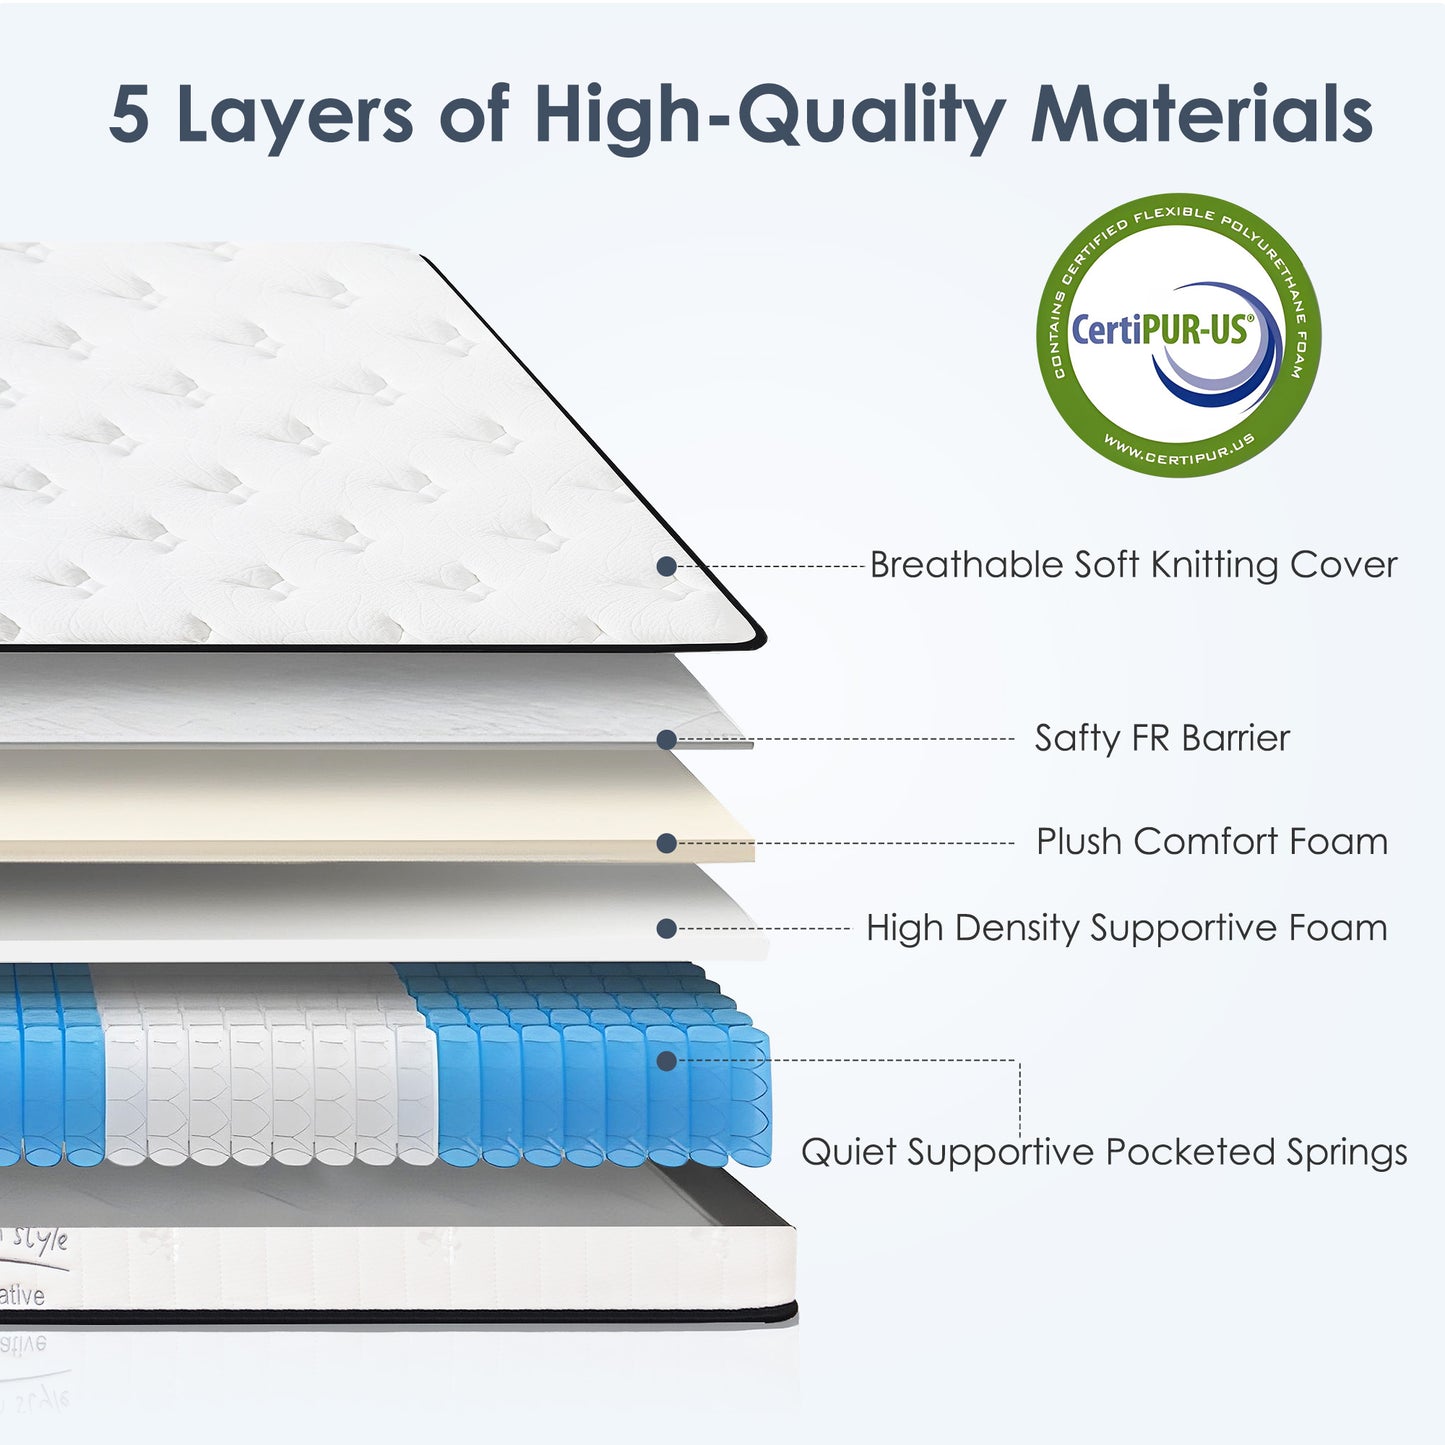 SogesPower 12inches Thickness Hybrid Mattress Gel Memory Foam- Queen, White